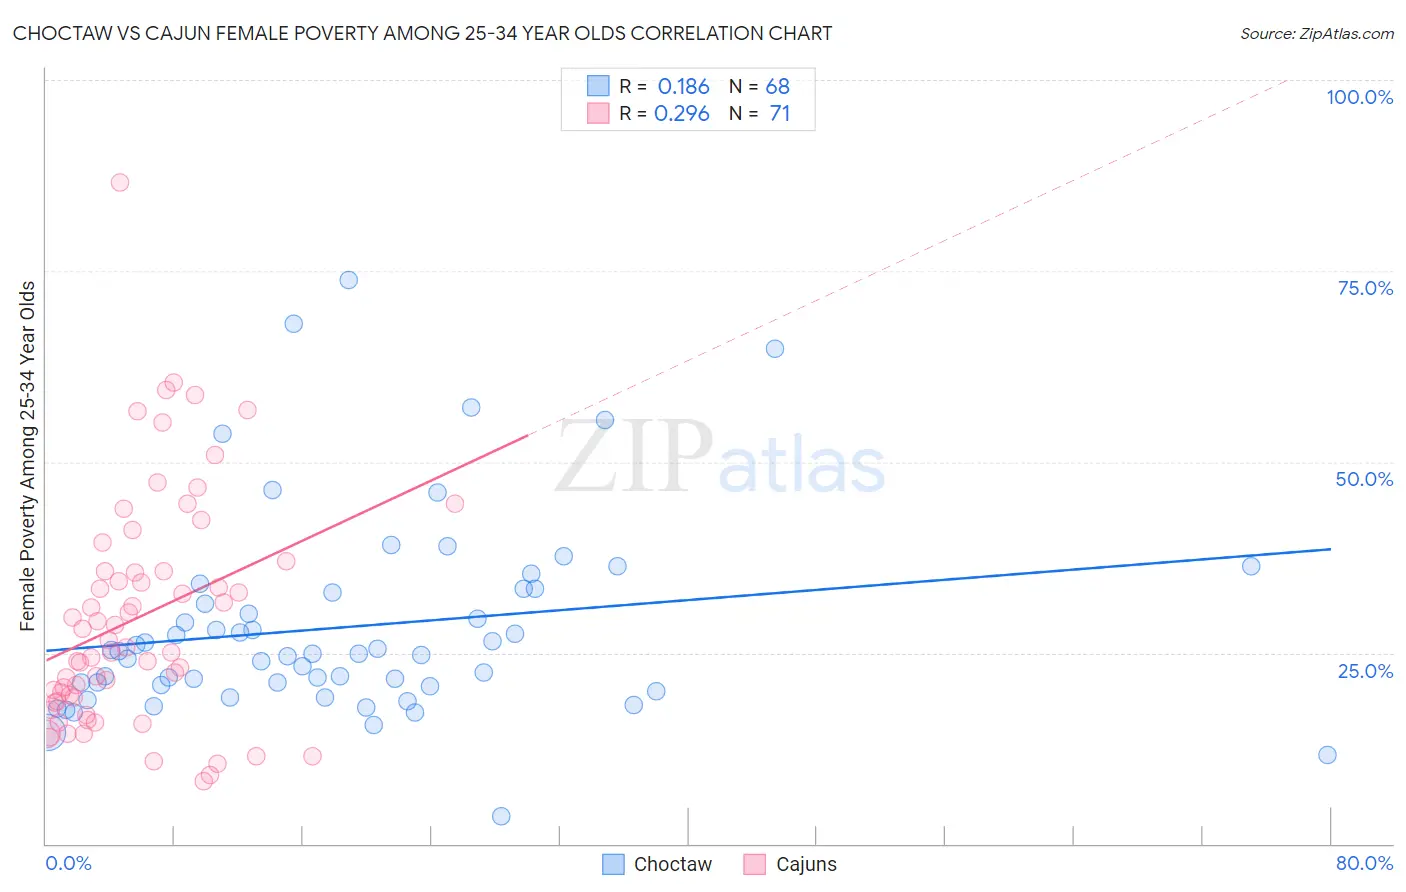 Choctaw vs Cajun Female Poverty Among 25-34 Year Olds